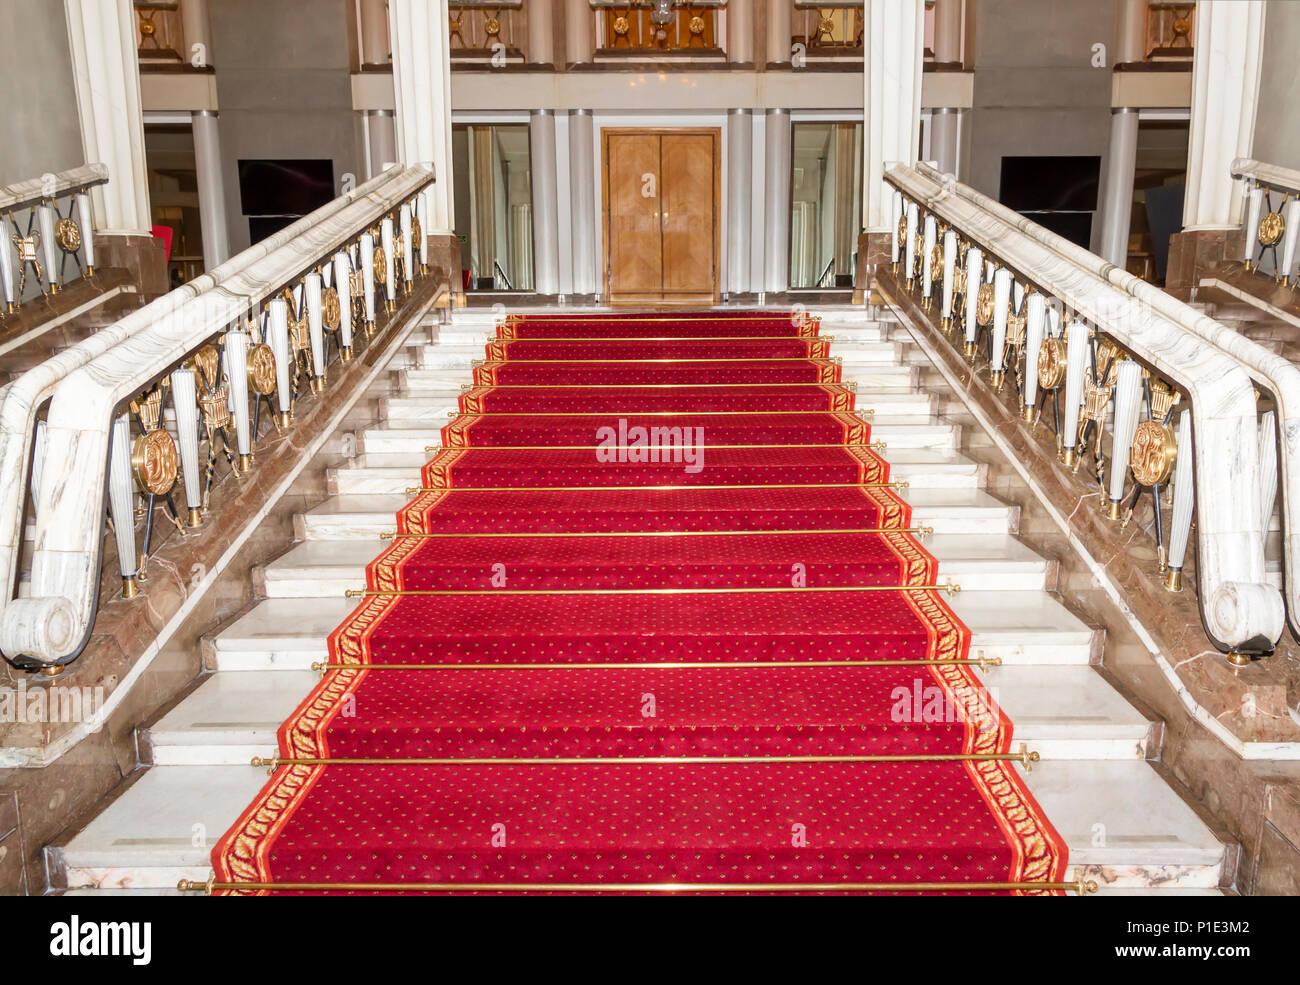 Stairwell in the Polish palace. Royal castle in Warsaw.Red carpet. Stock Photo